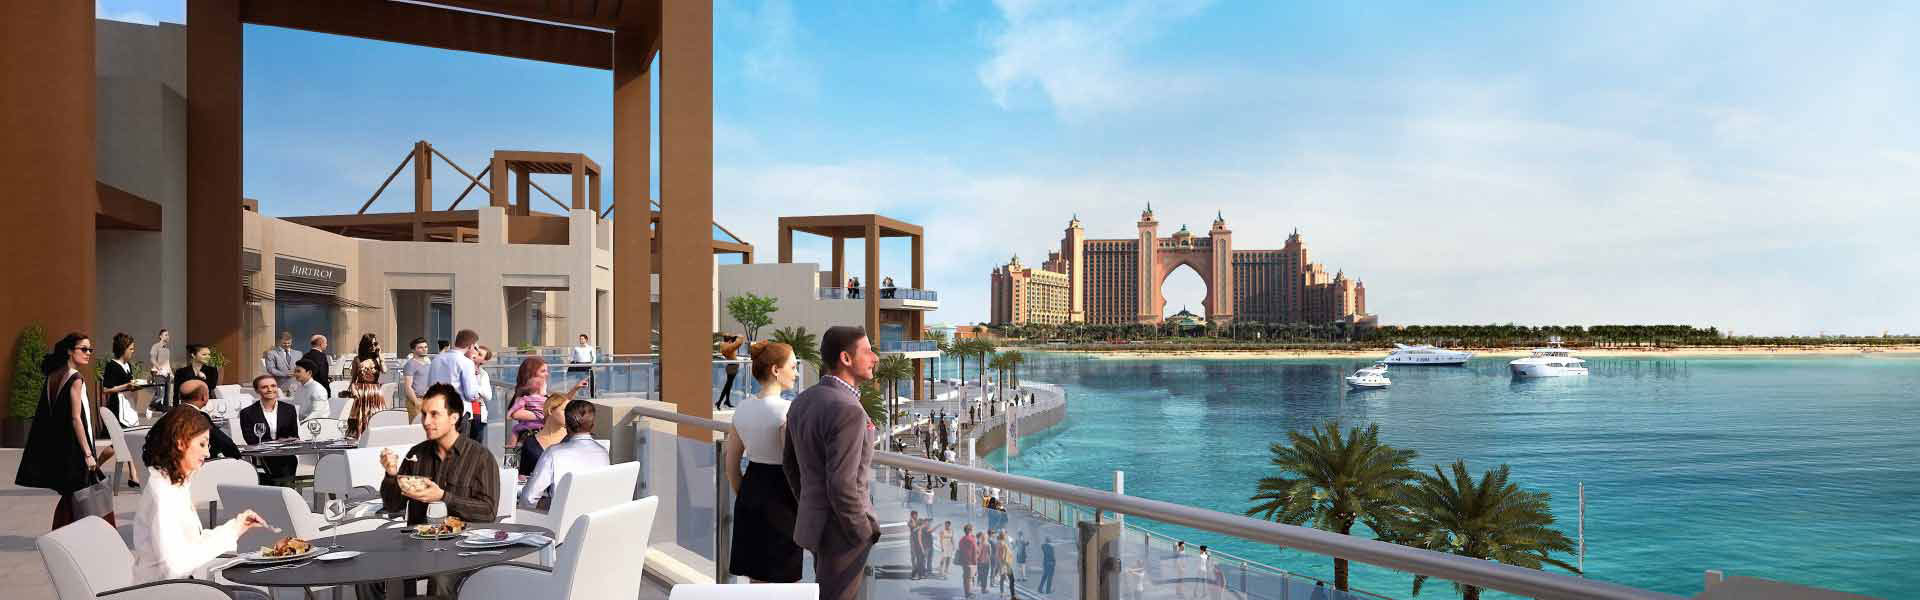 Banner Graphic image of hotel Atlantis and people enjoying the view from distance